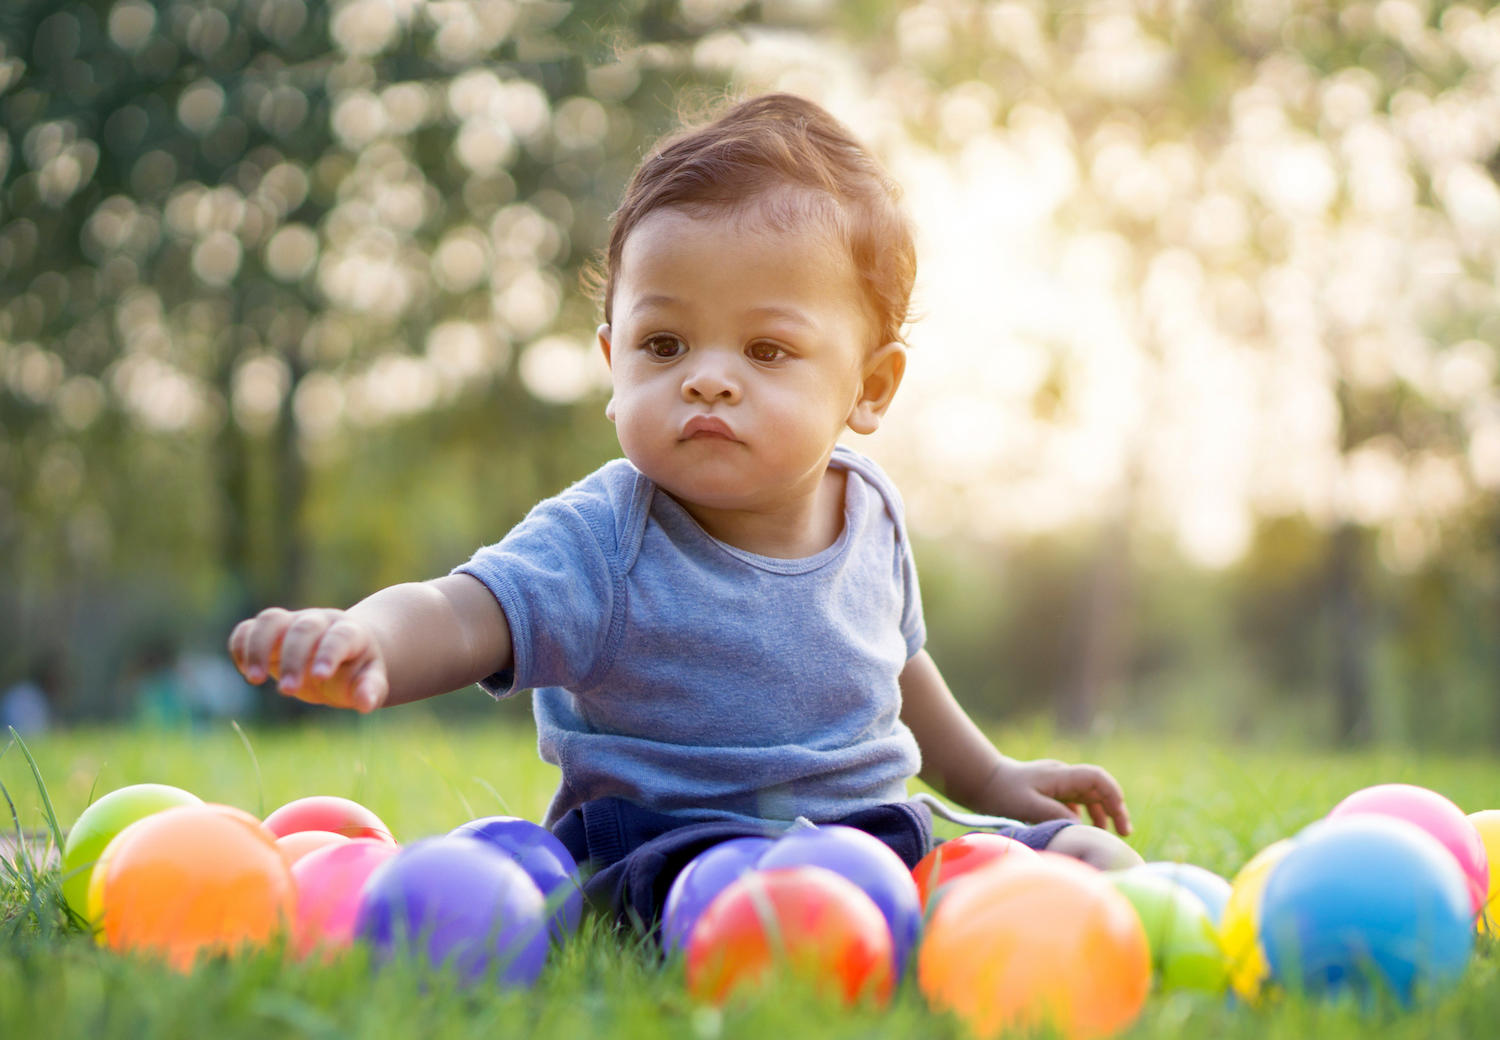 Baby playing outside in green grass with multicolored balls.